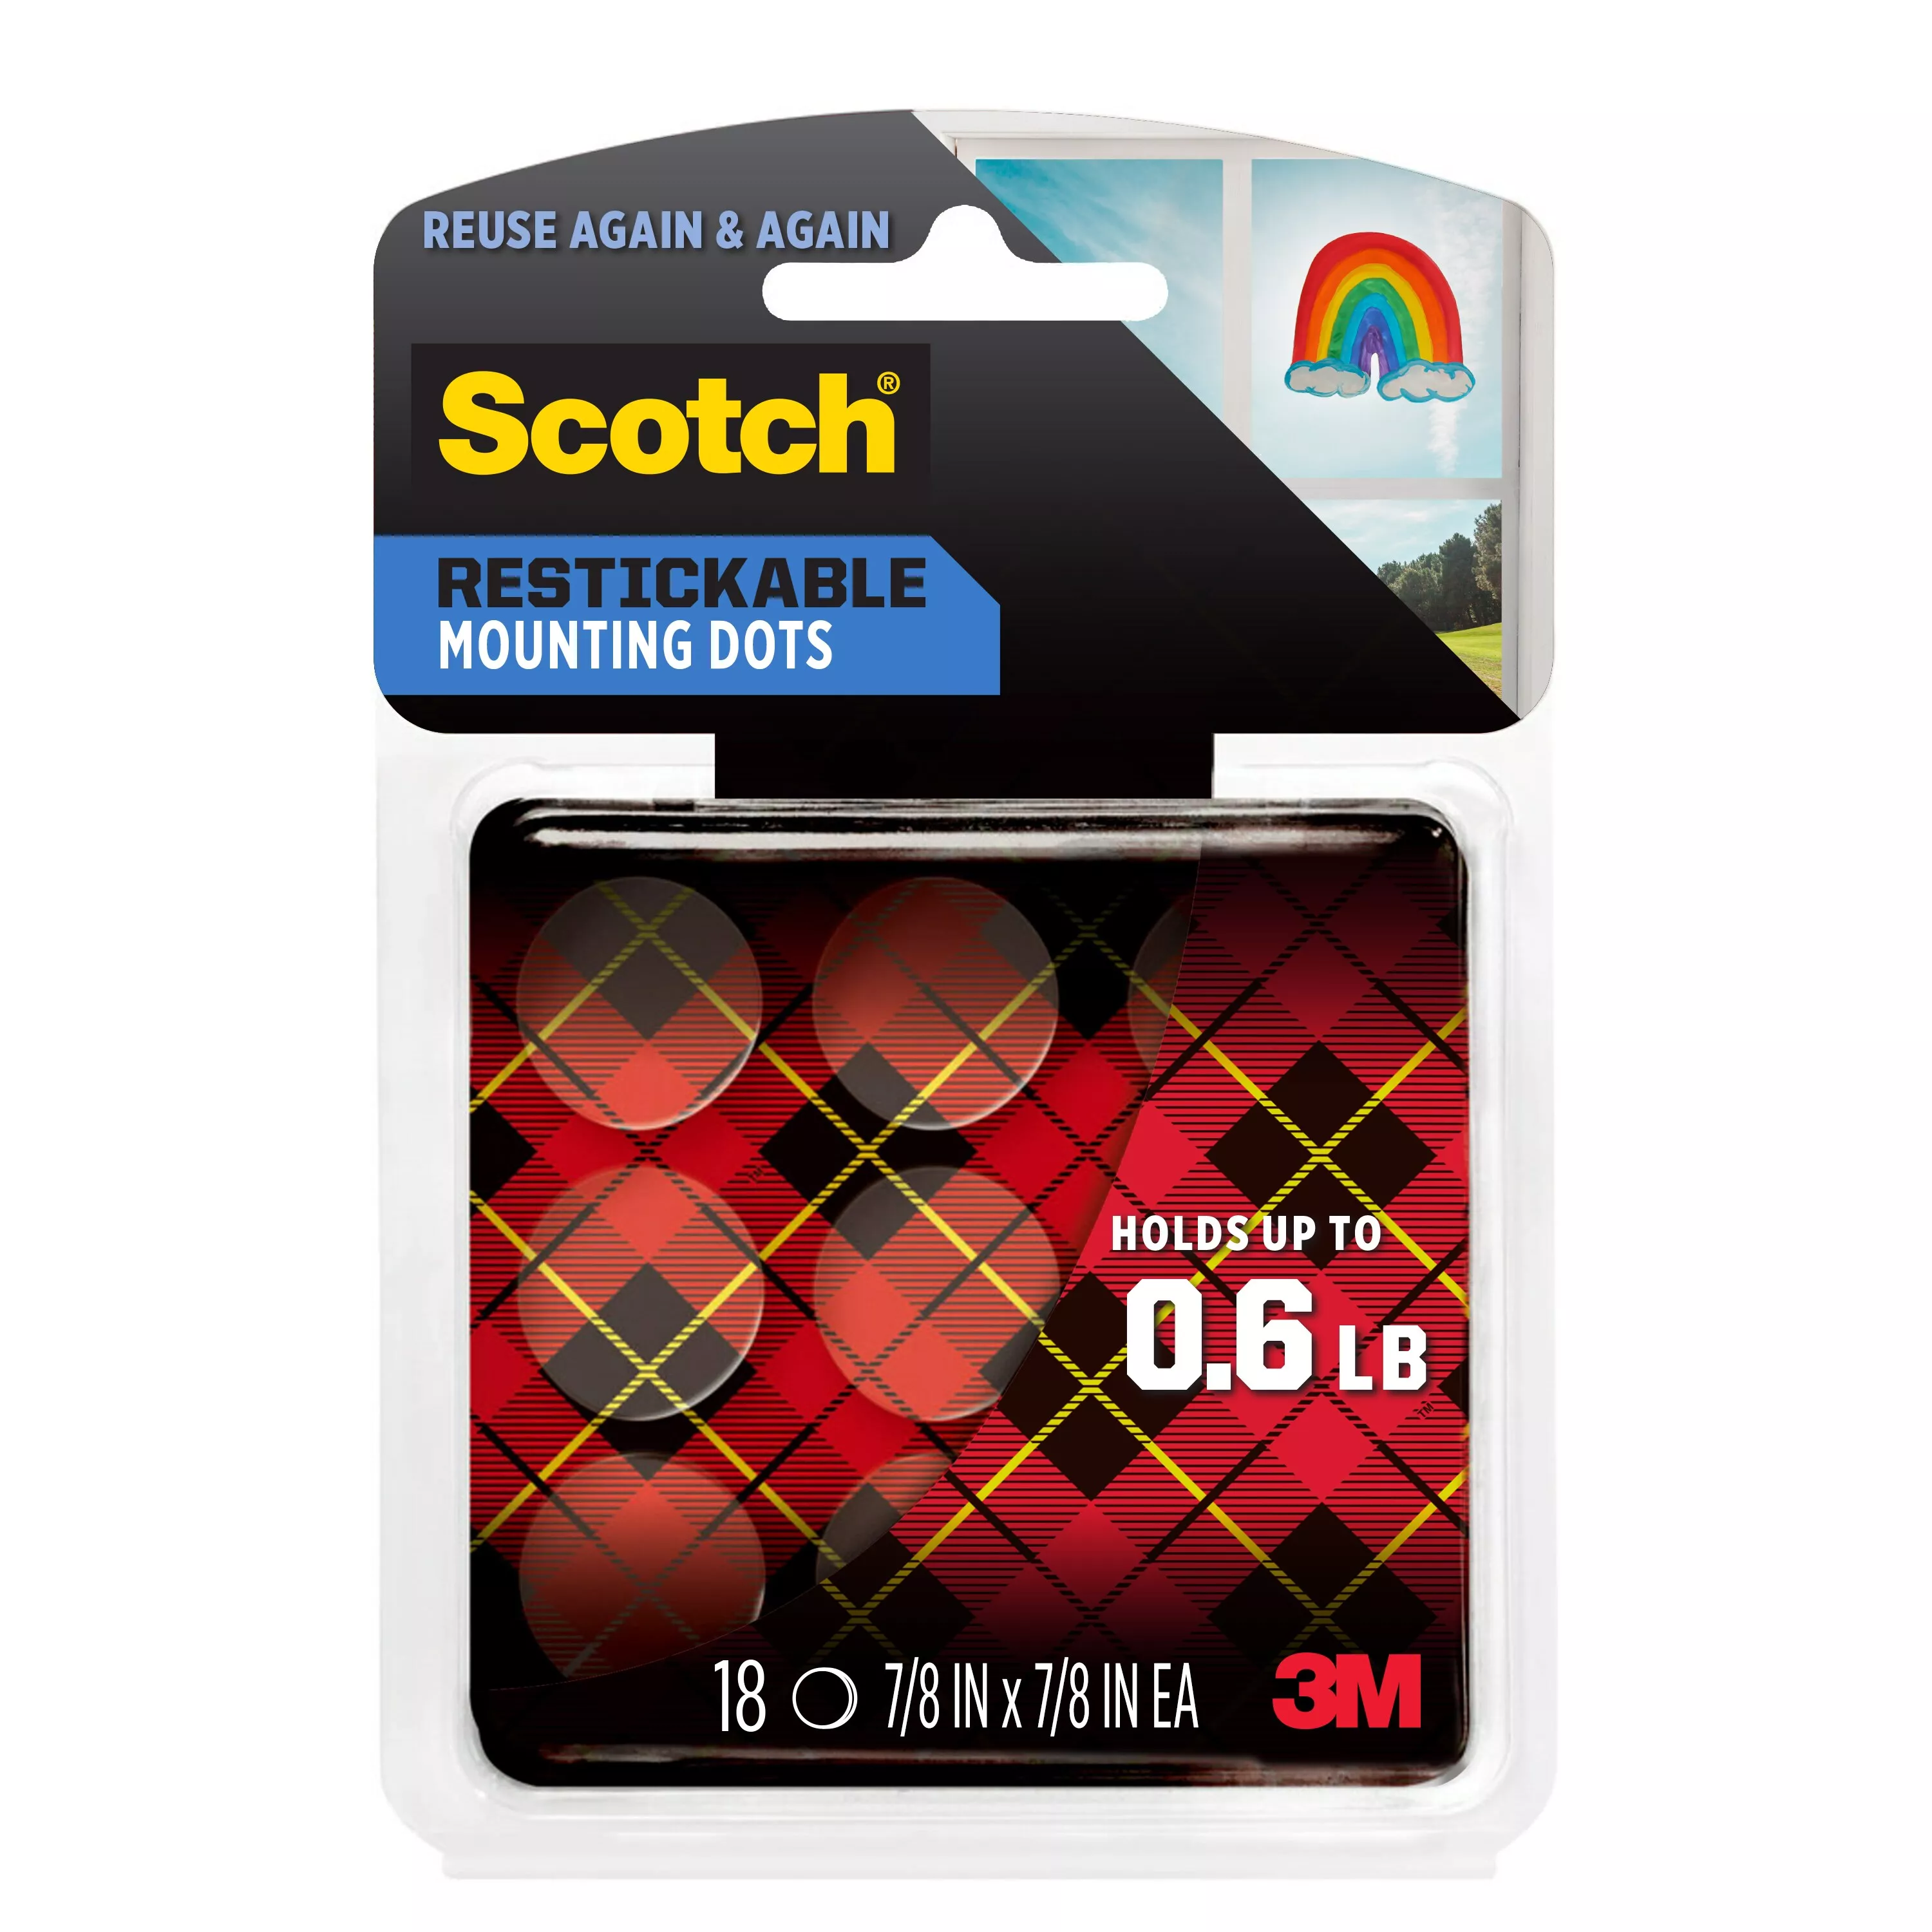 Scotch® Restickable Mounting Dots R105S, 0.875 in x 0.875 in (2.2 cm x 2.2 cm)